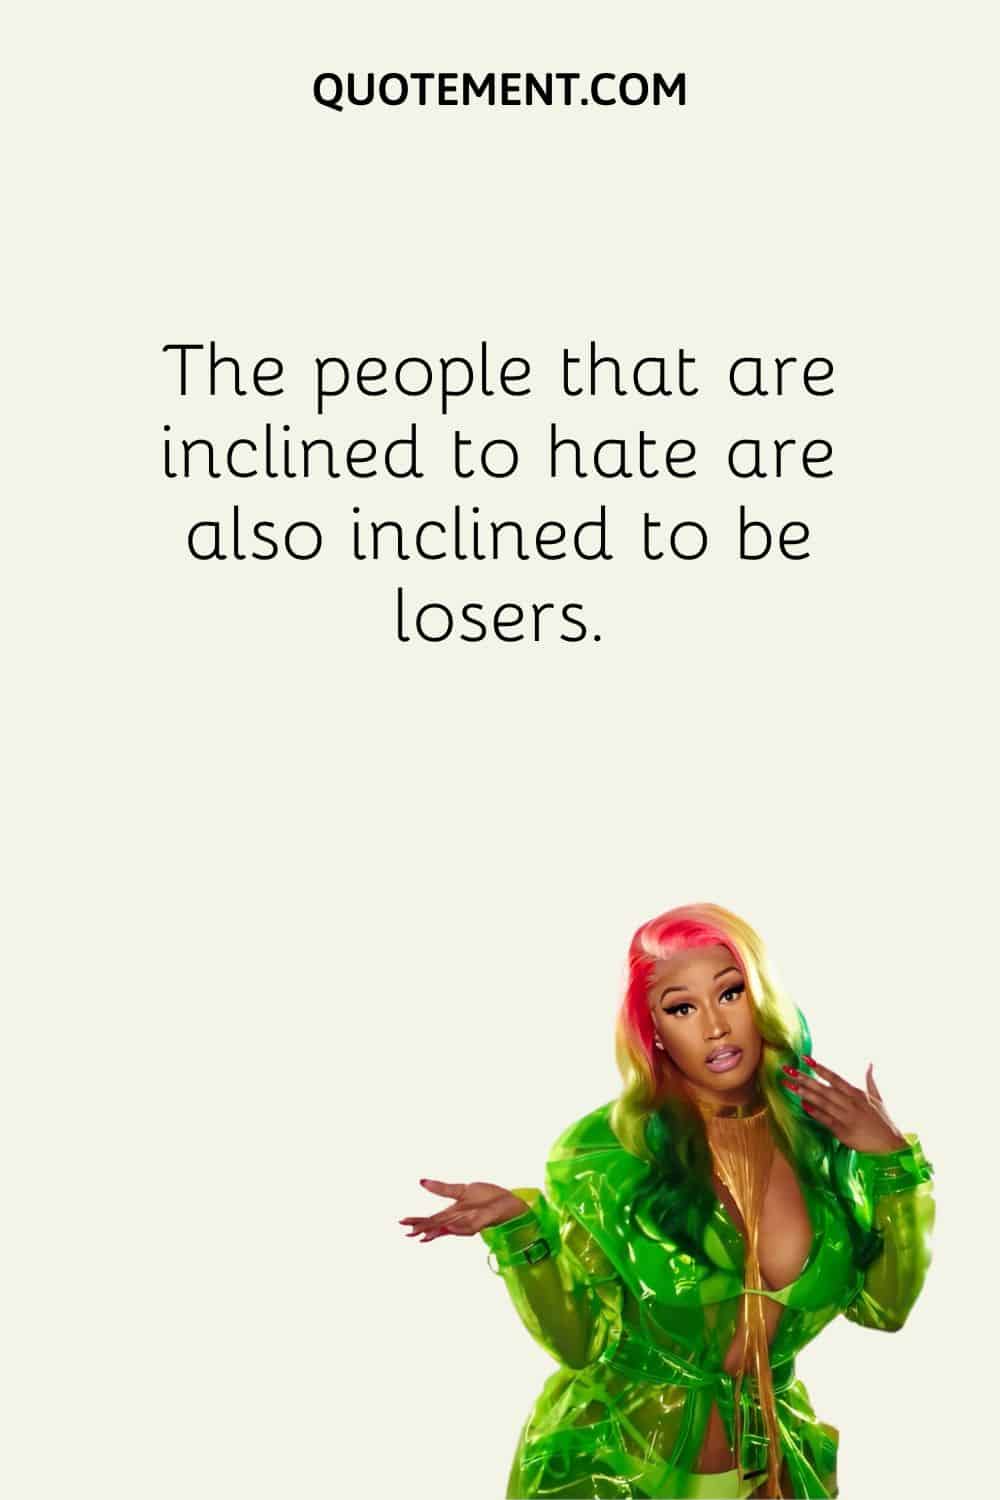 The people that are inclined to hate are also inclined to be losers